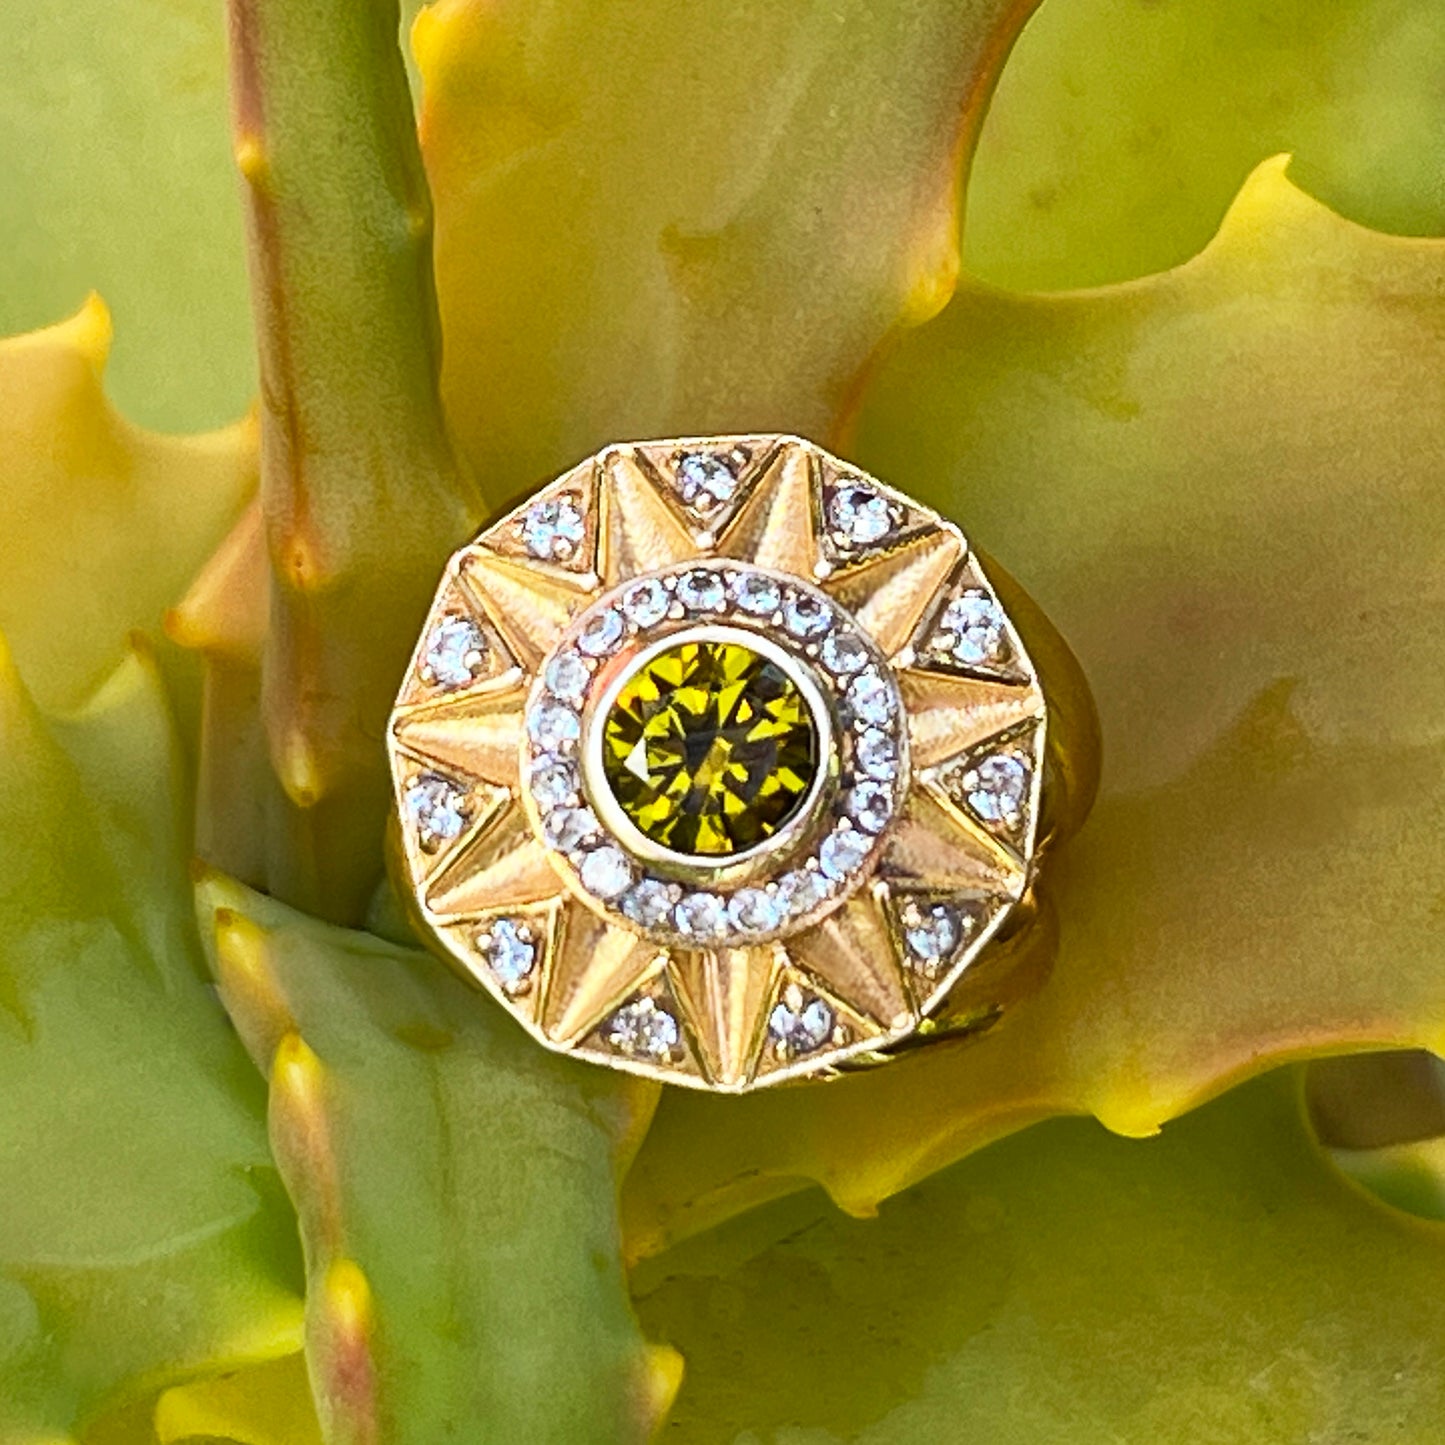 Sunshine of Your Love Cocktail Ring - Fairmined Gold Diamond Cocktail Ring